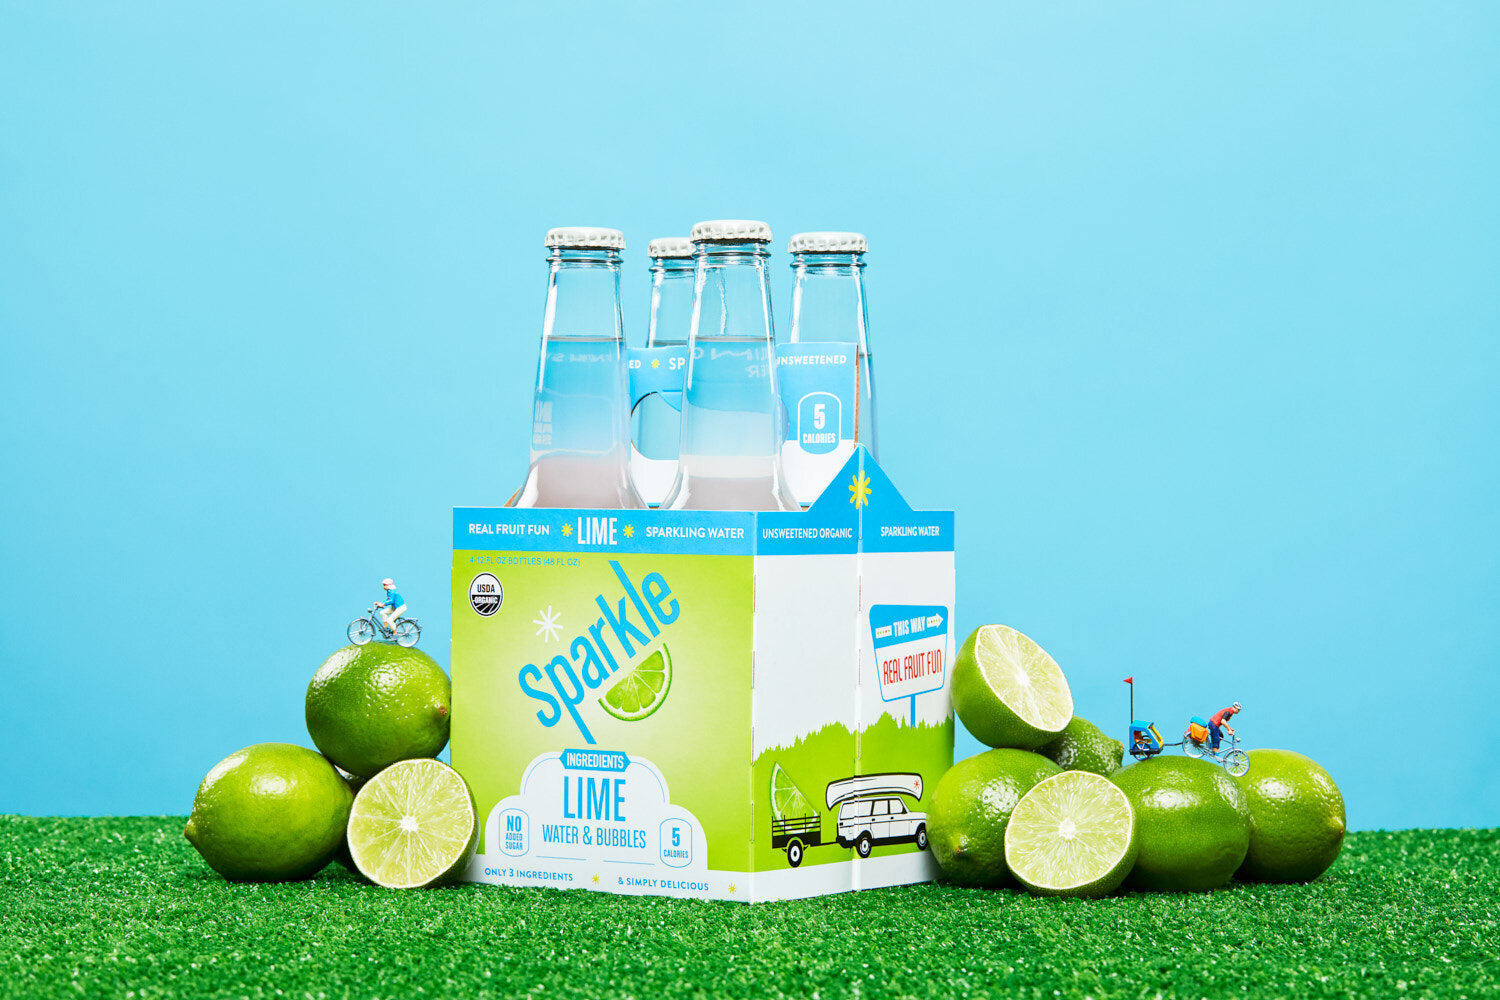 Creative product photography: Four pack of lime Sparkle by WiscoPop on grass with limes.  Tiny figures of people bike across the produce. 